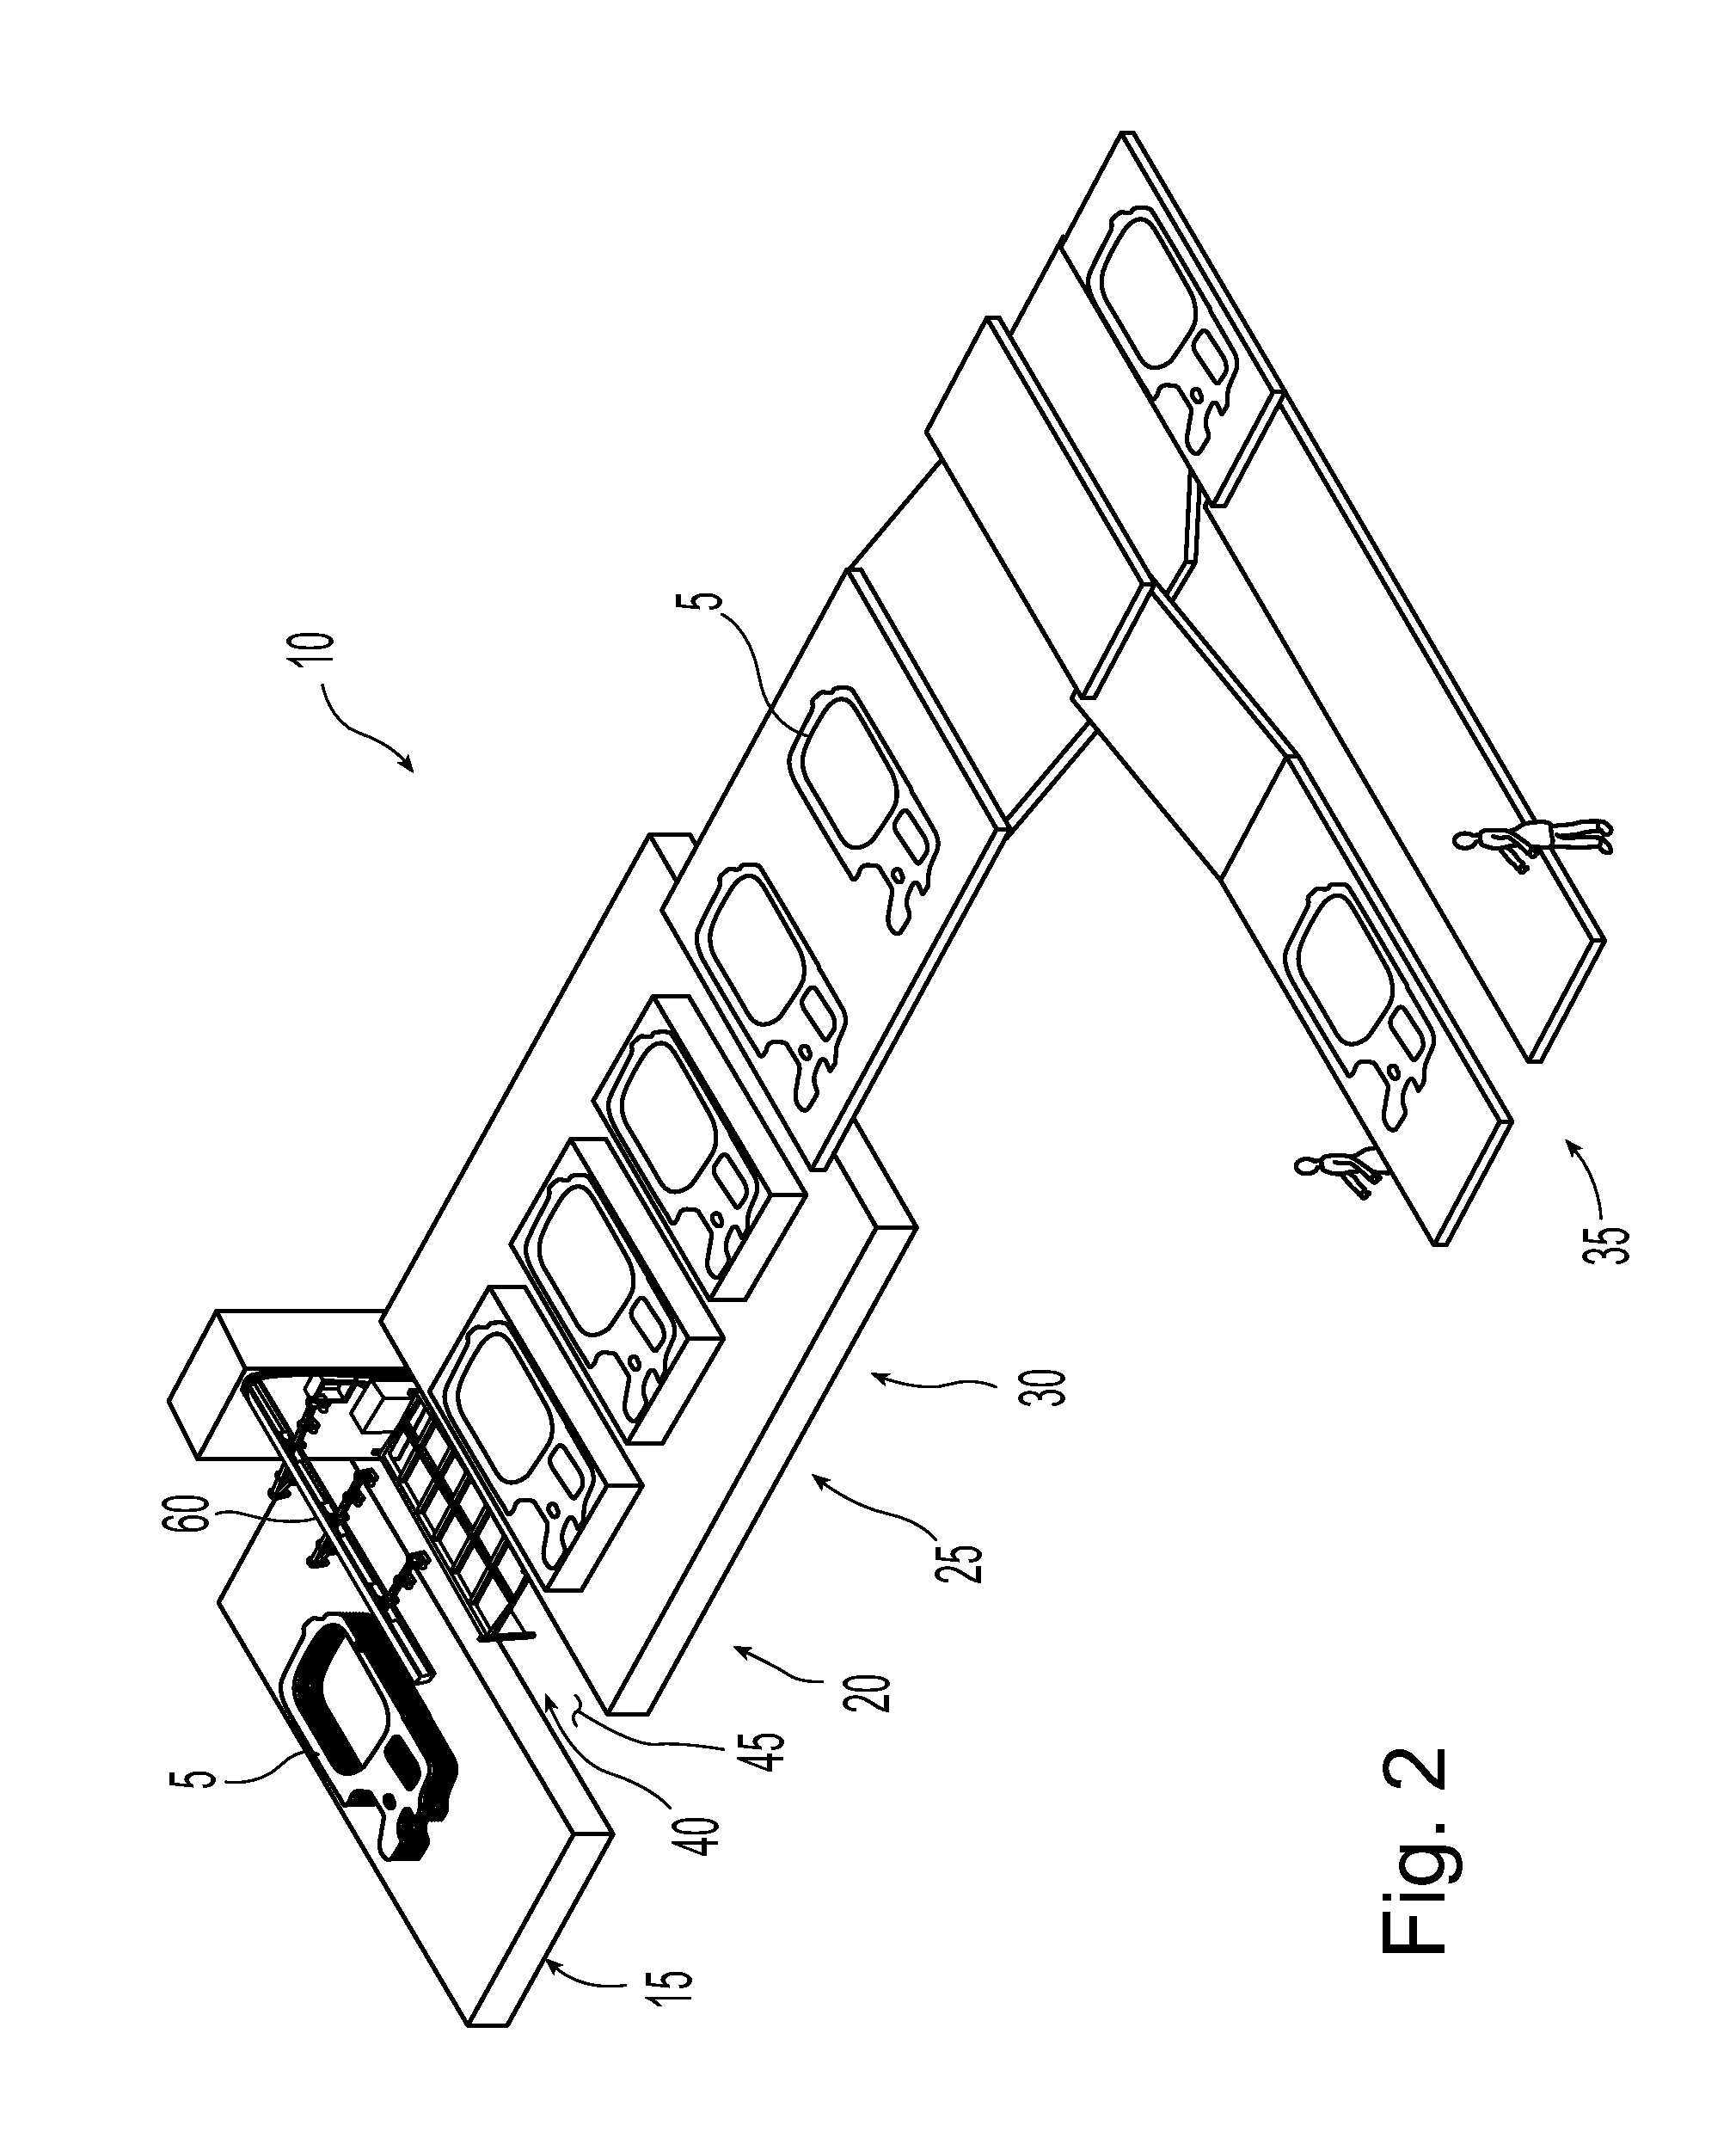 Stamping in-line crack detection system and method